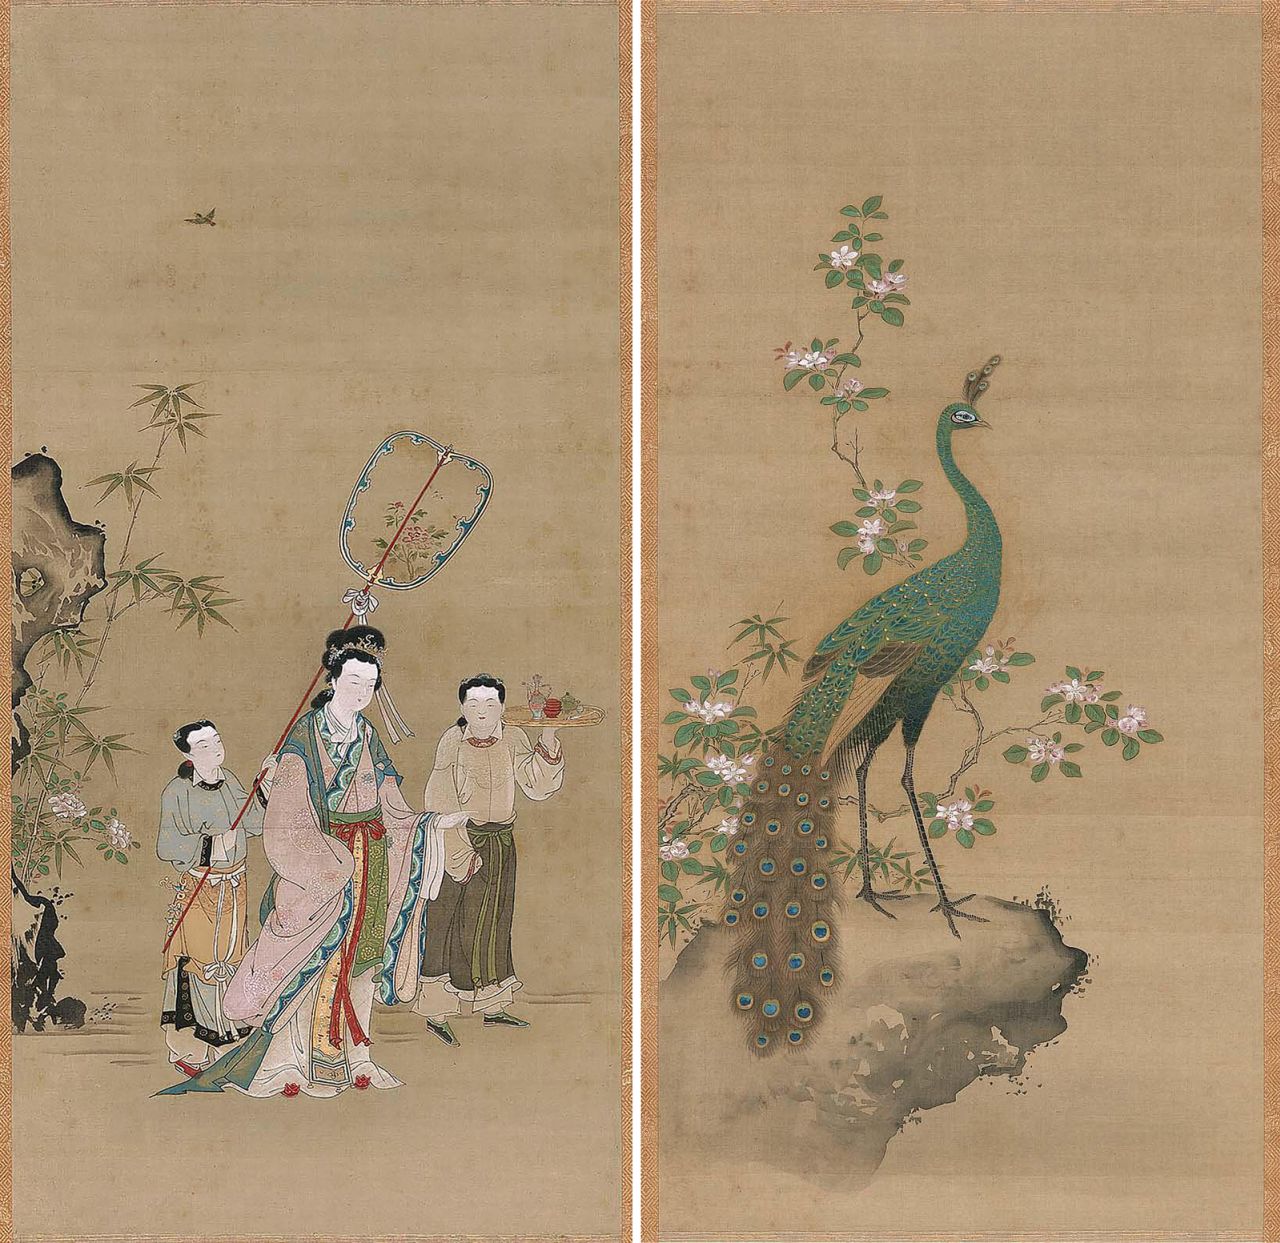 A portrait of Chinese consort Yang Guifei, who was revered for her beauty in the 8th century (left) and a composition featuring a peacock and peach blossoms (right).